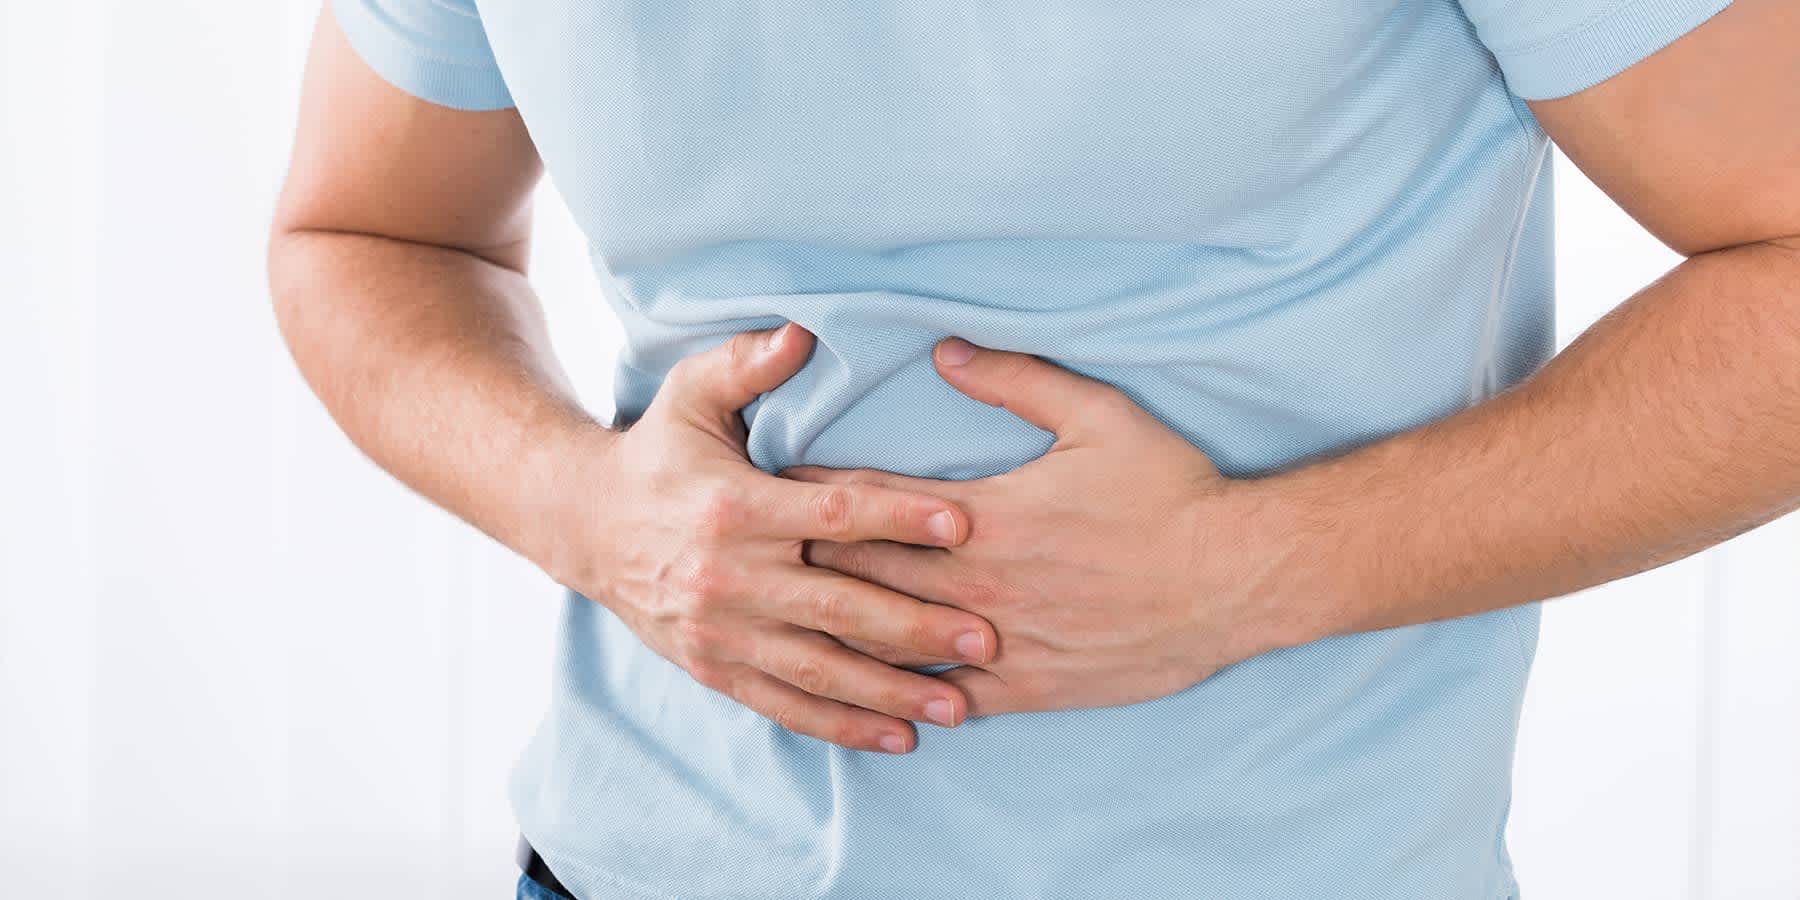 Man holding his stomach in discomfort while wondering if stress can cause nausea